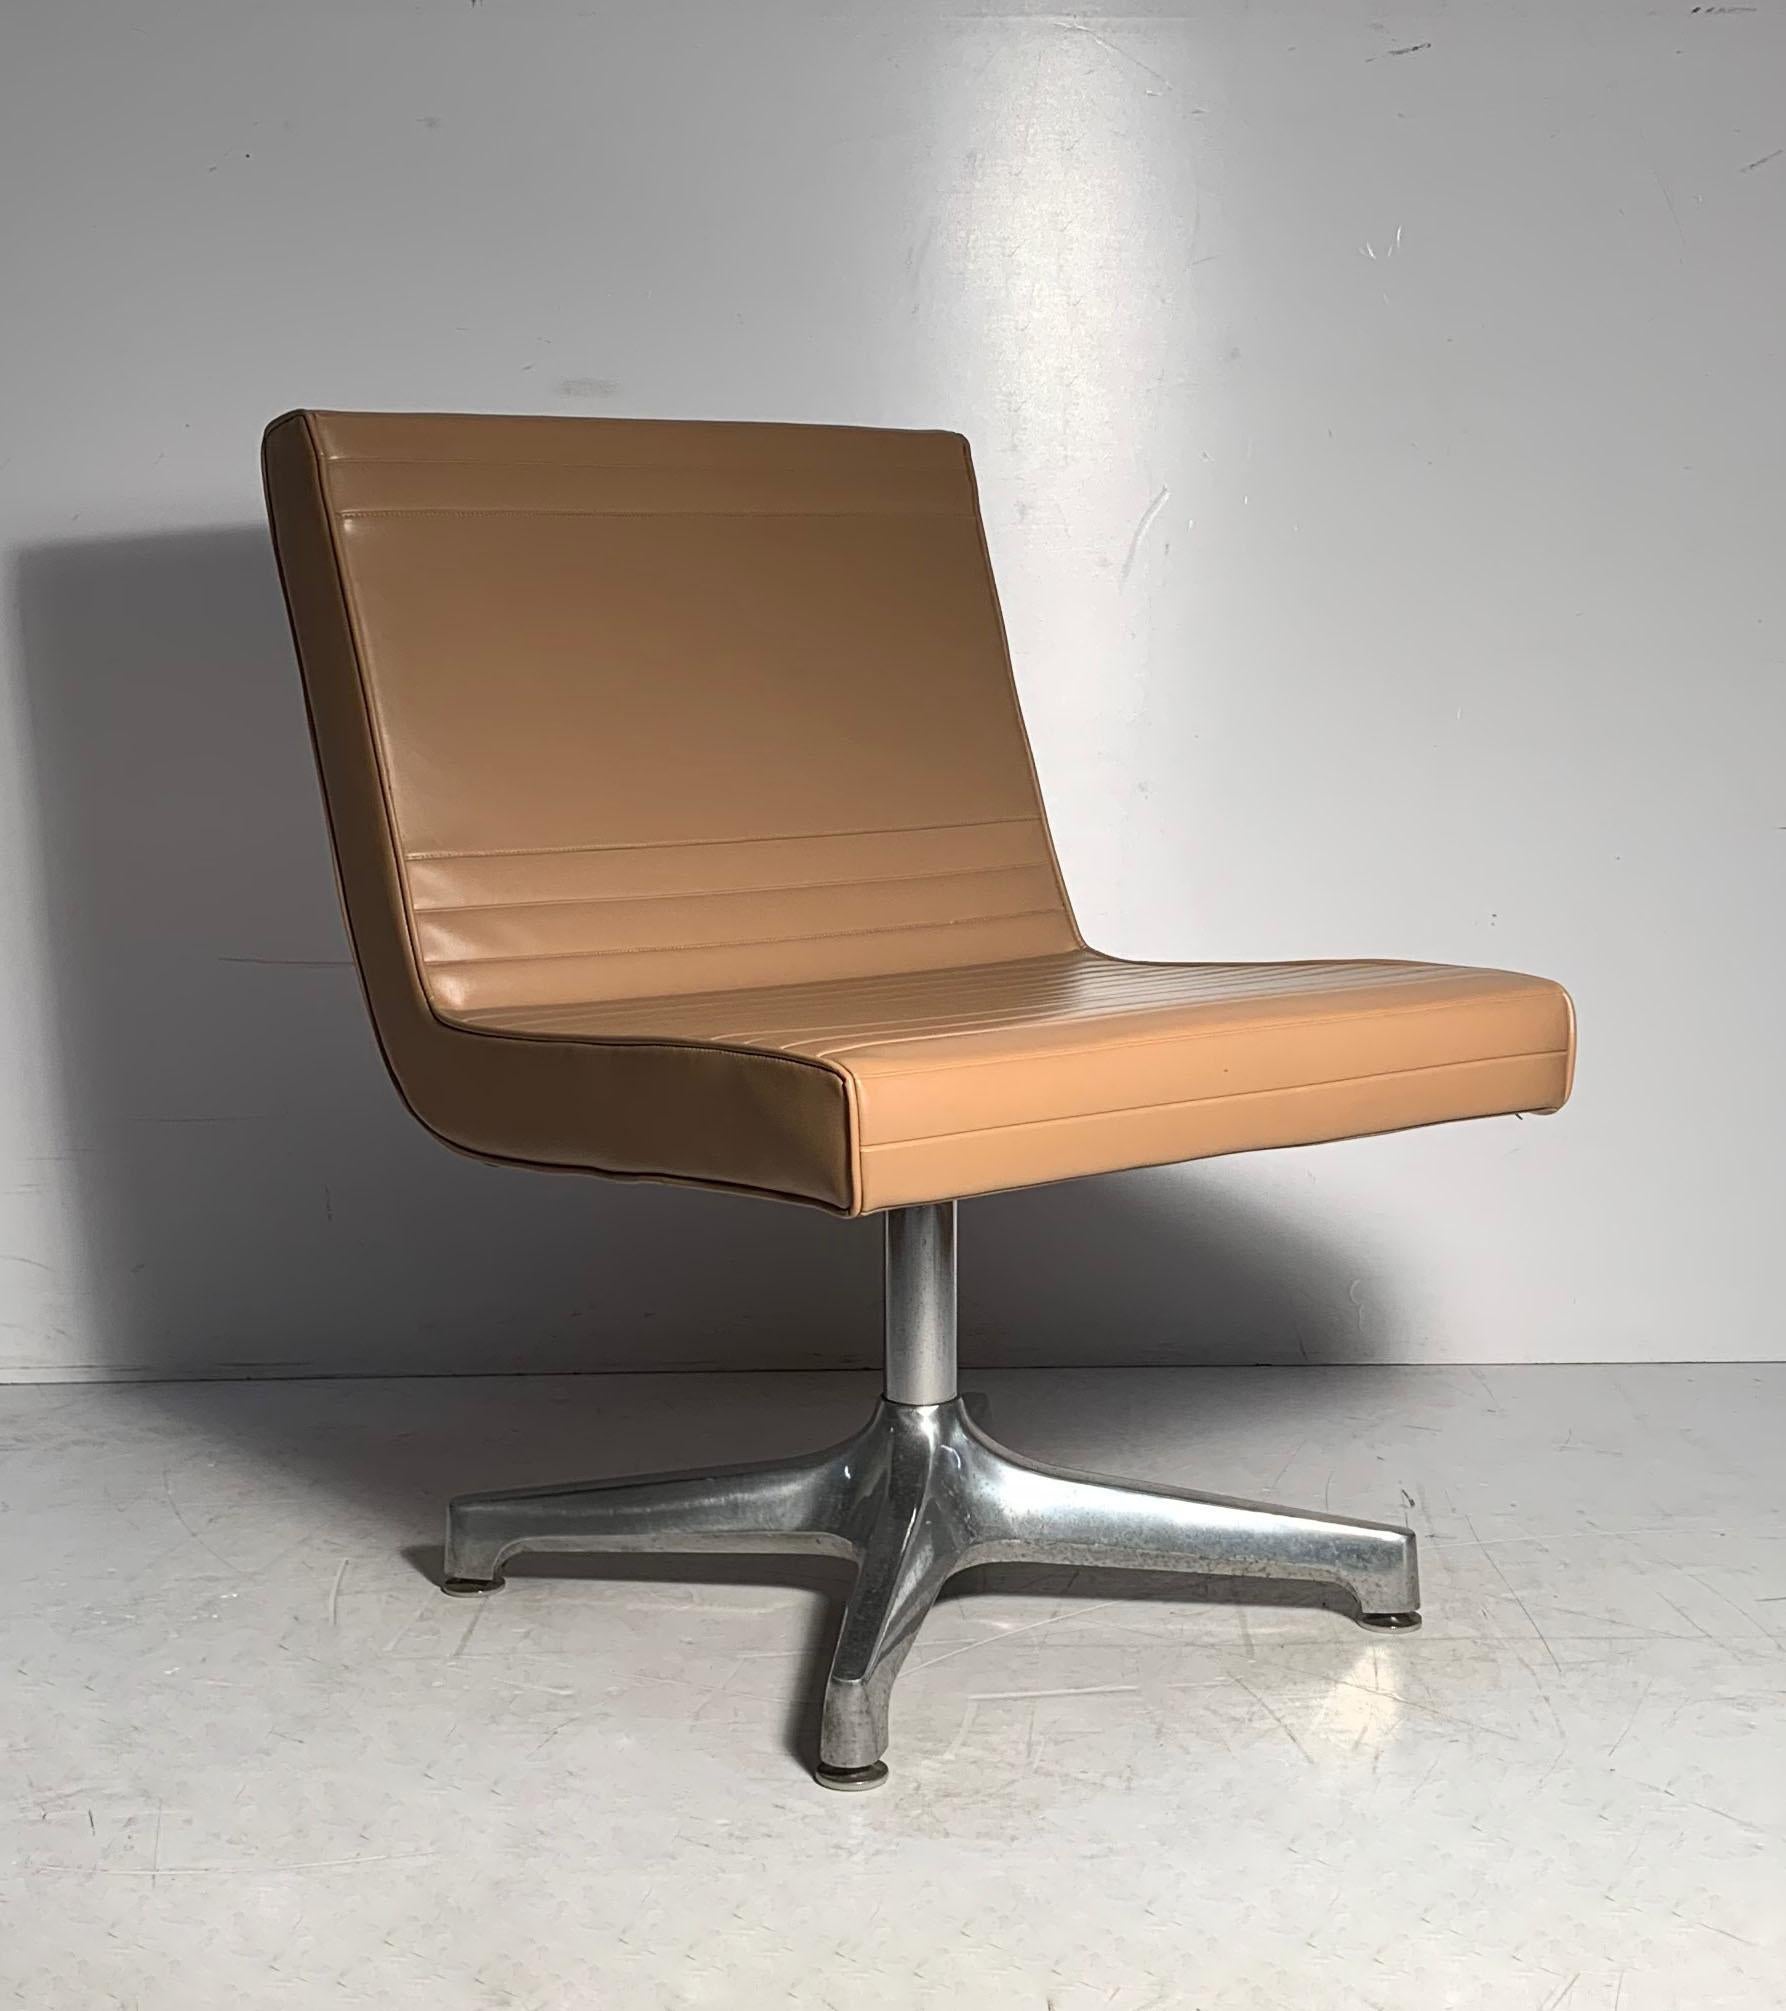 Vintage Techfab chromcraft lounge chairs. Original vinyl upholstery in very nice condition. Arms are optional. Easily removable. Shown with arms in last photos. 

In the manner of Herman Miller Alexander Girard, Charles Eames, Milo